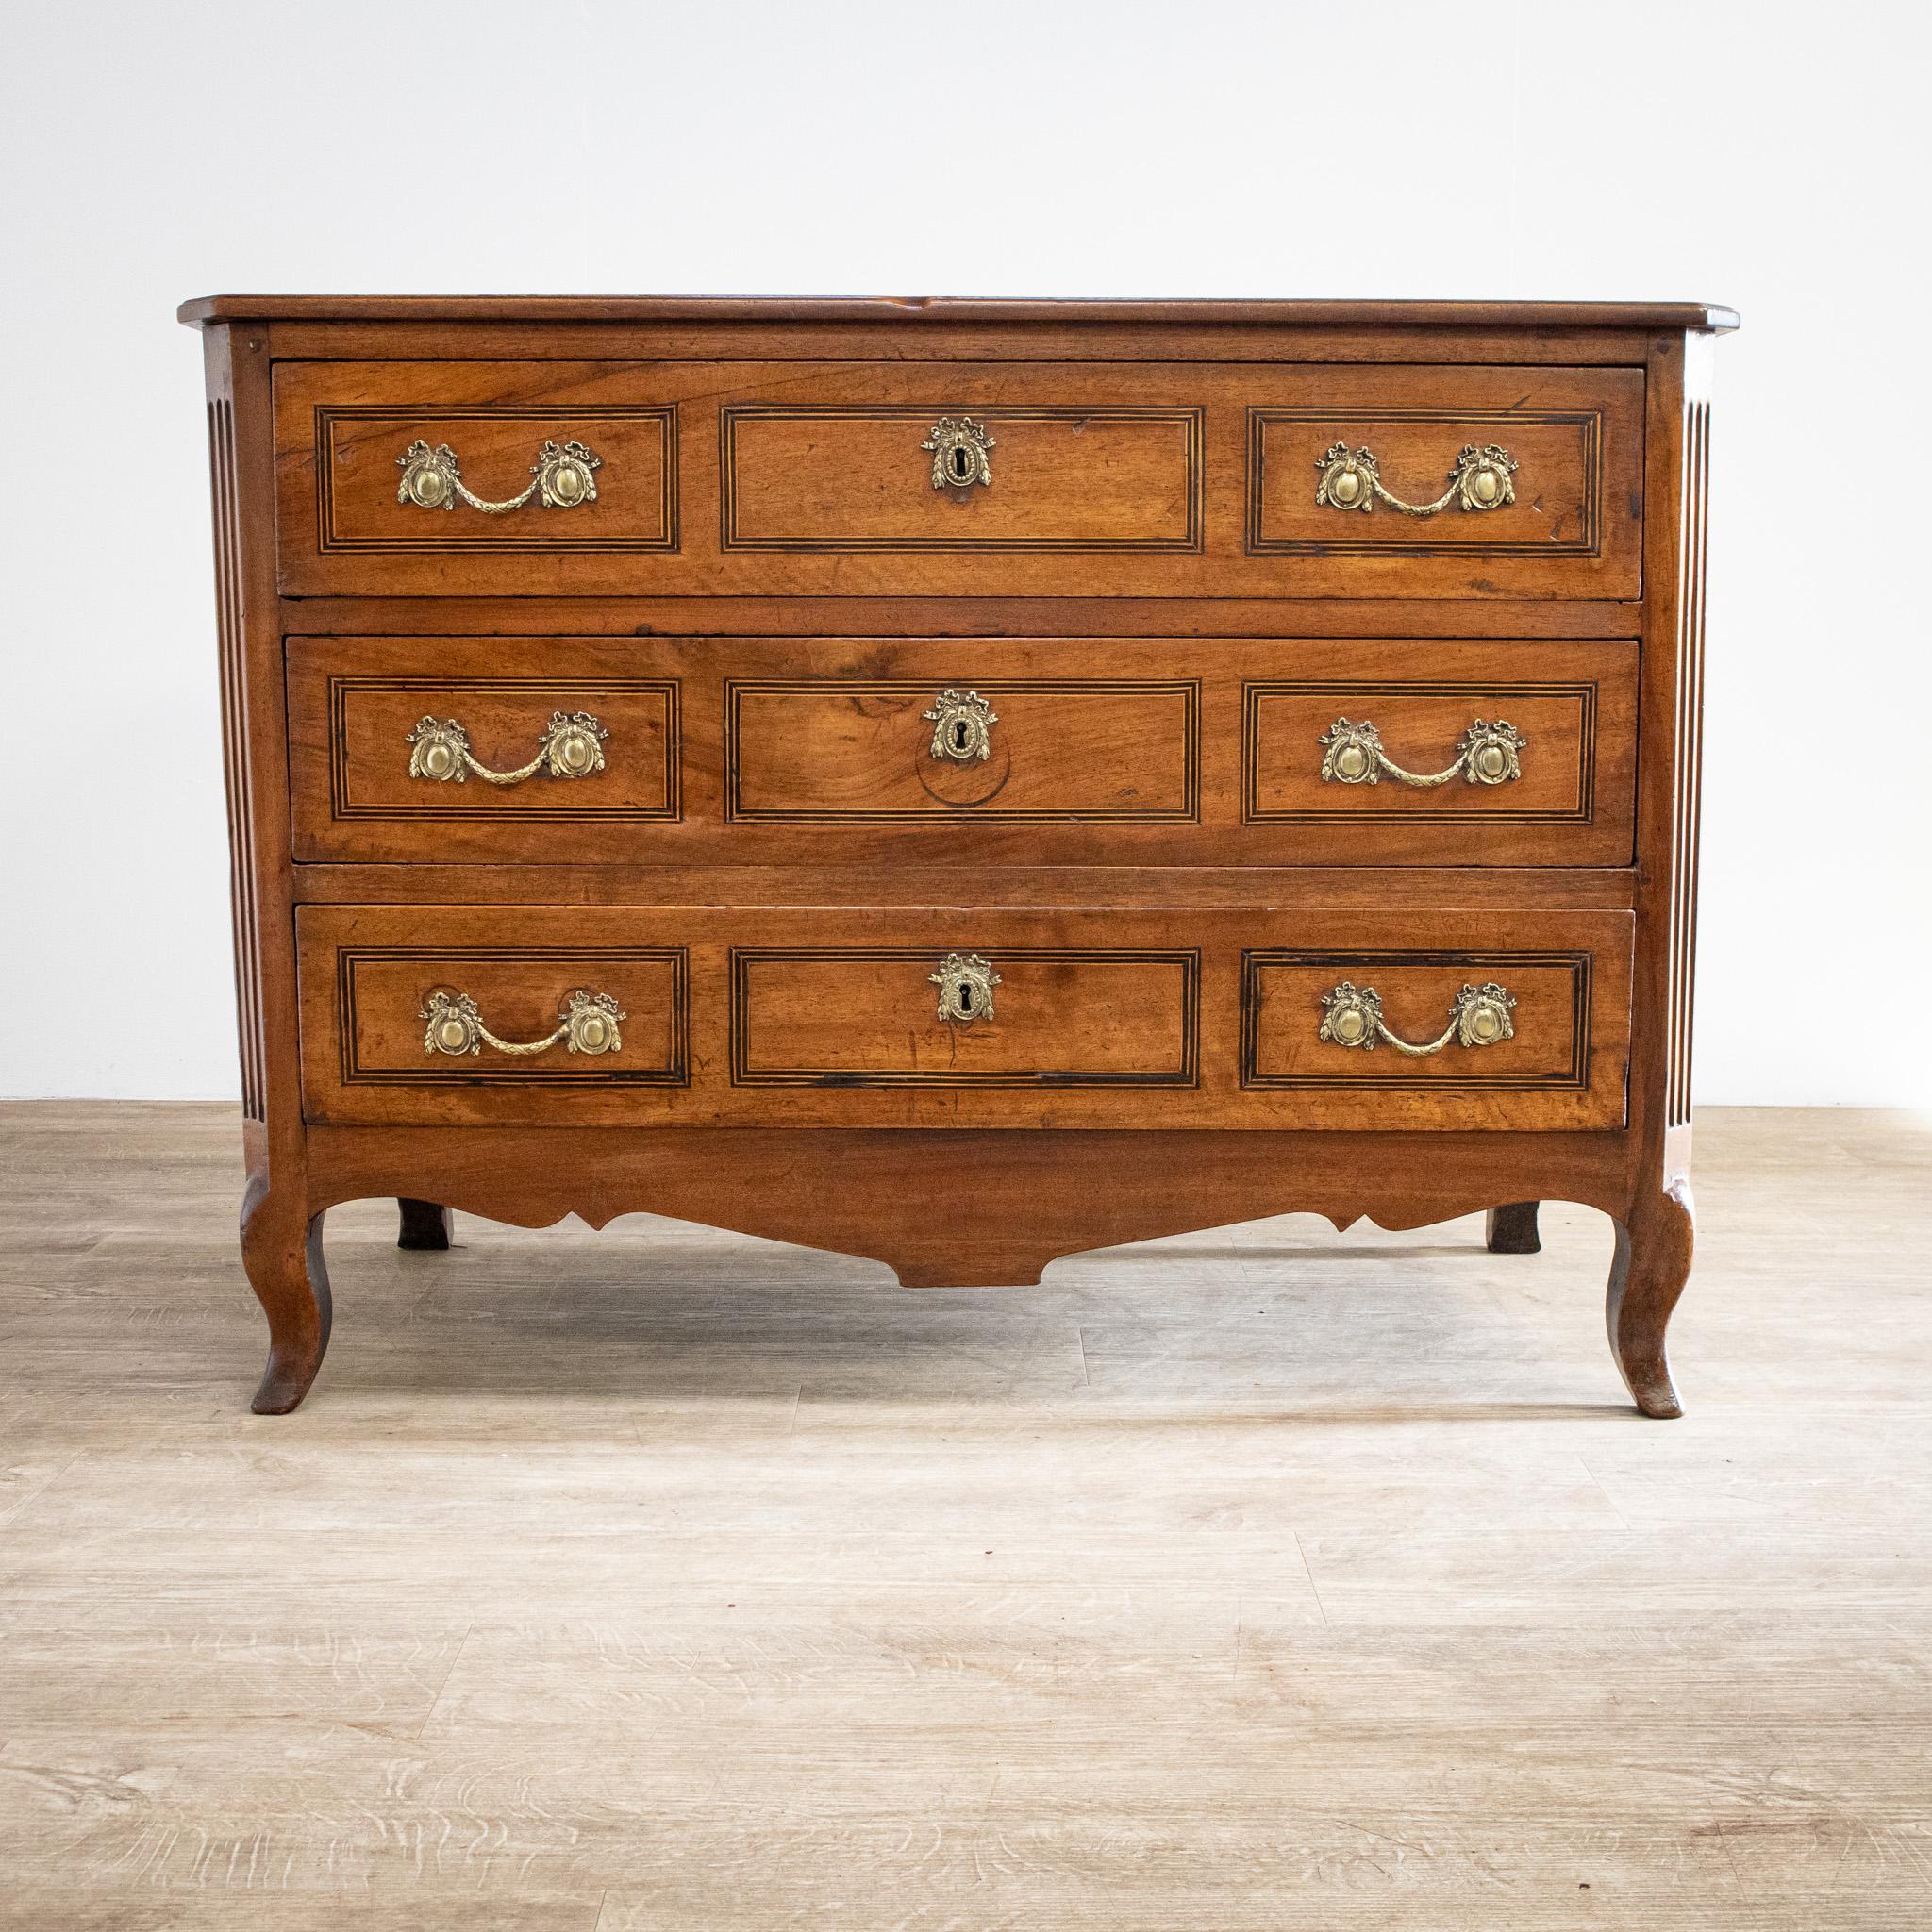 A beautiful piece of furniture, this 18th century walnut commode in the Louis XV style has the character and patina of long use. The three drawers have some lovely inlaid stringing on the fronts suggestive of three panels on each. It has cabriole